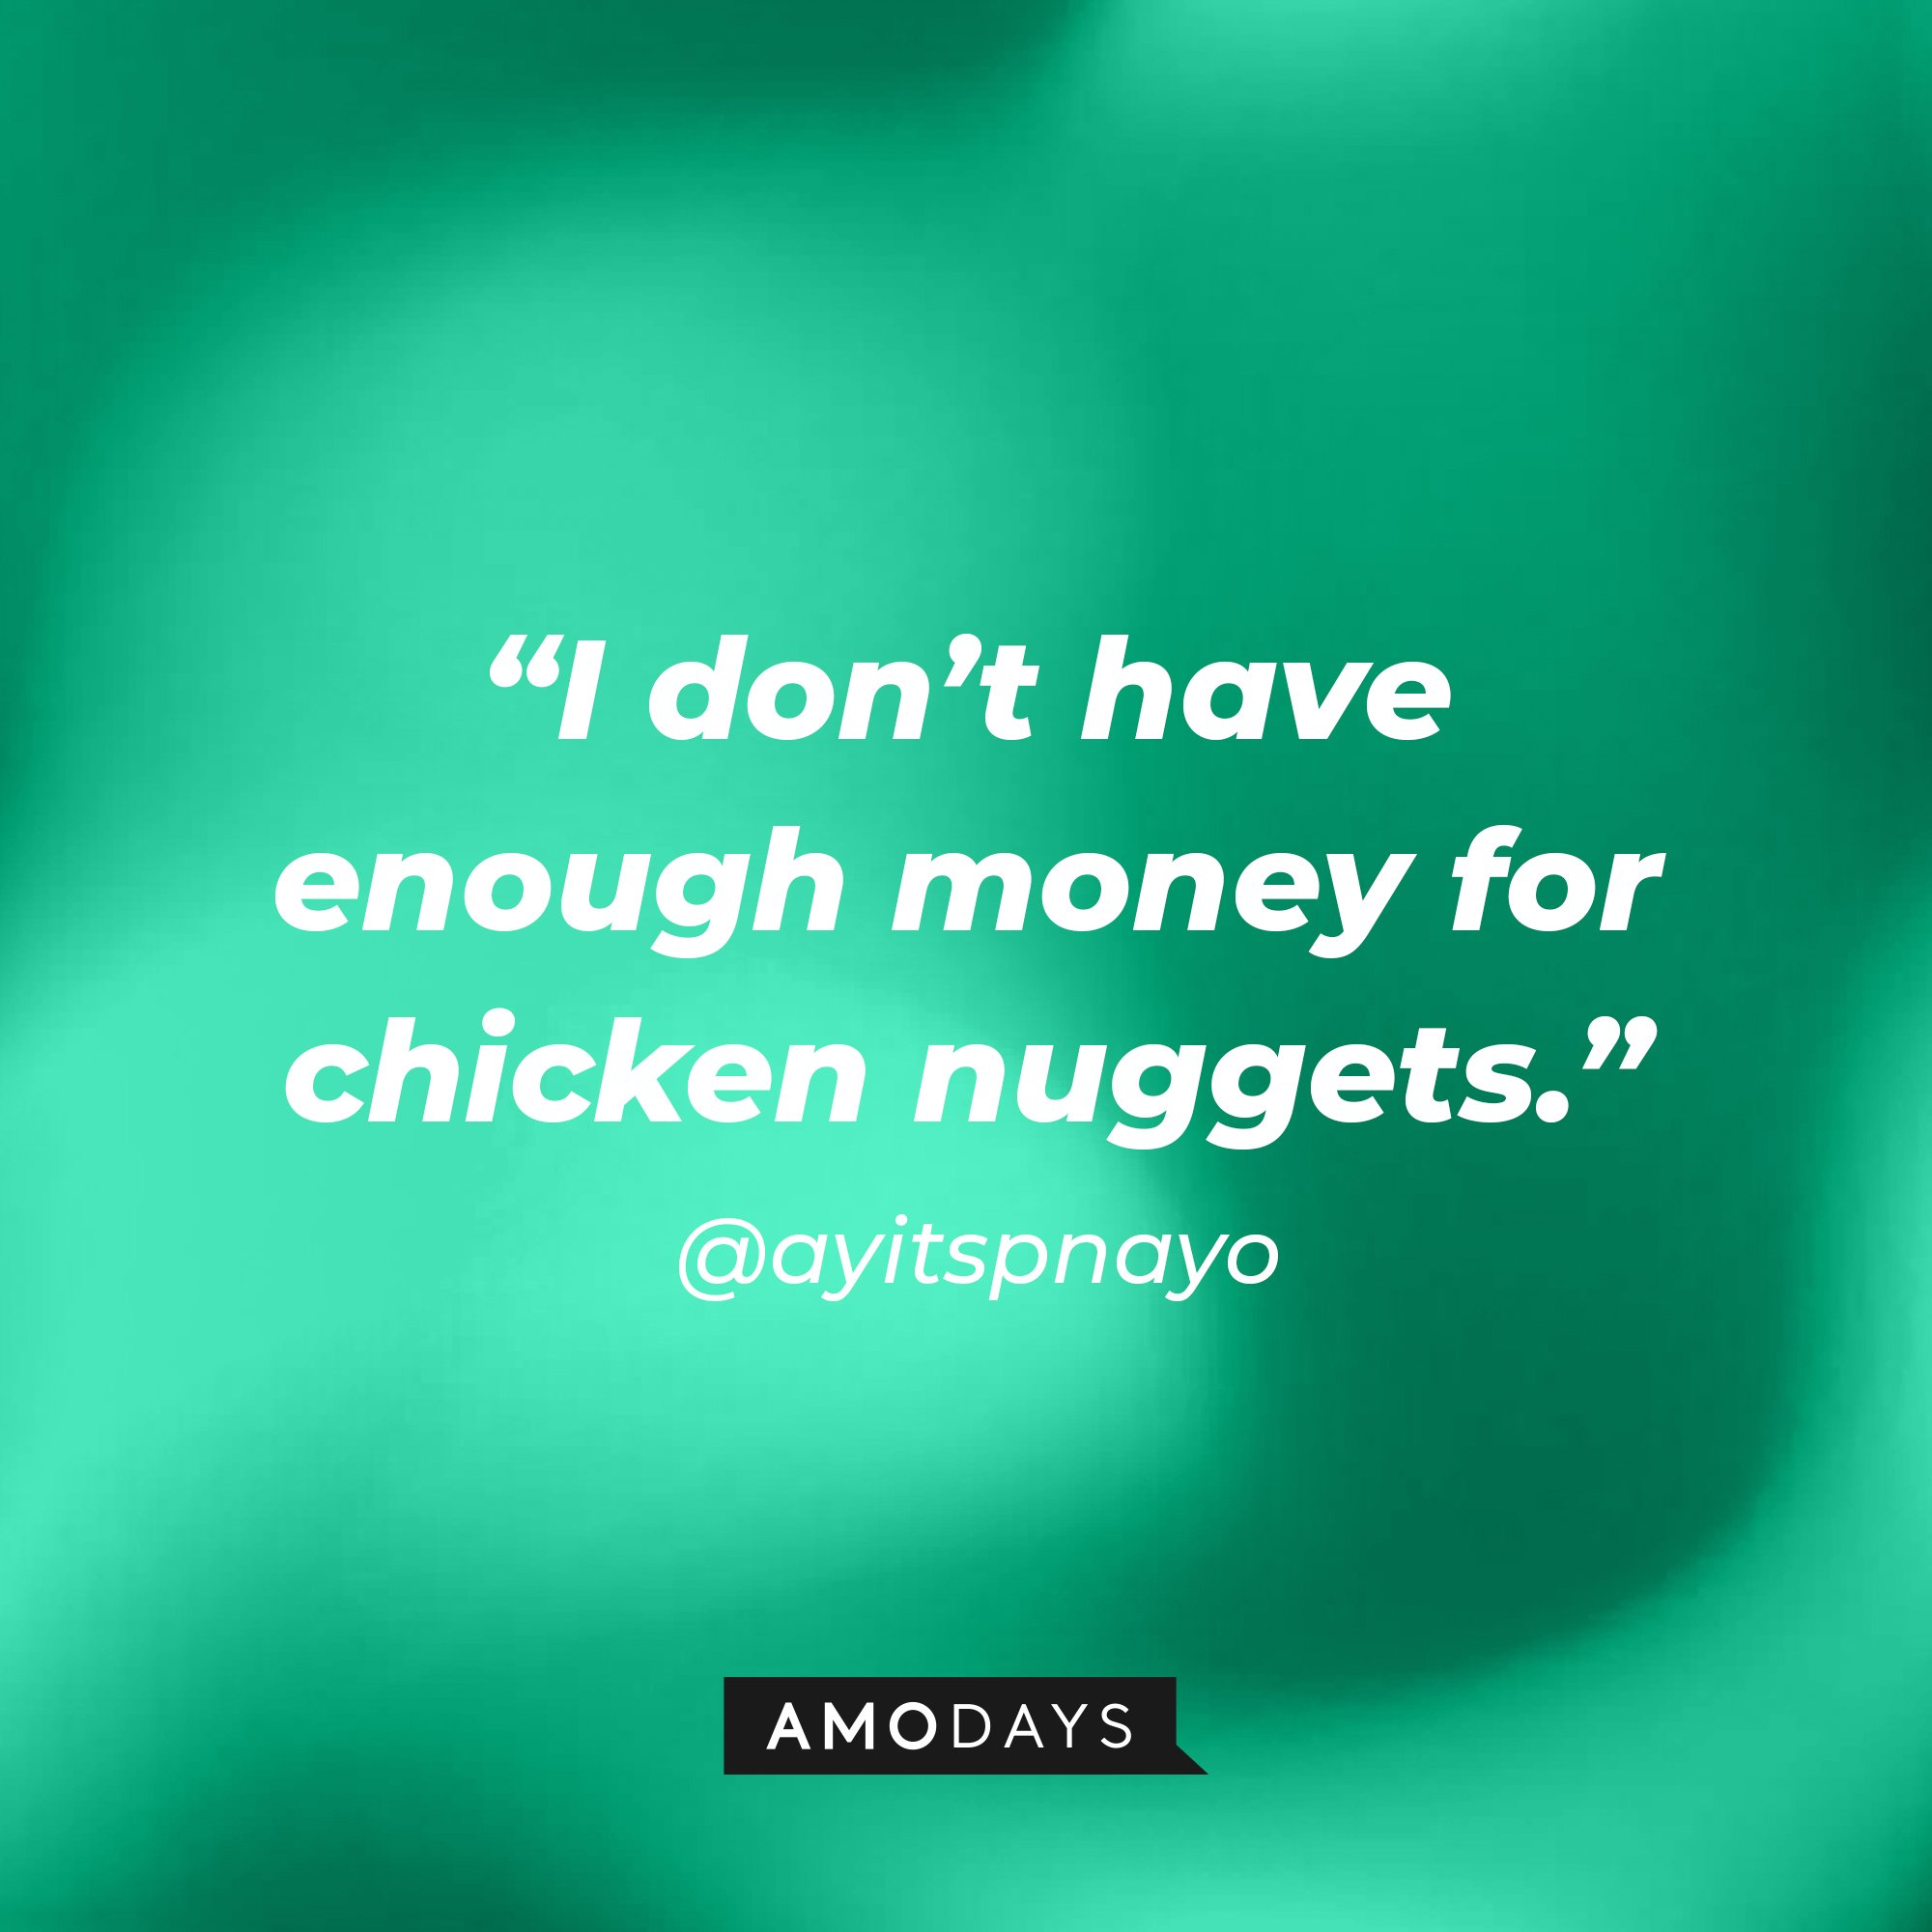 @ayitspnayo's quote: “I don’t have enough money for chicken nuggets.” | Image: AmoDays